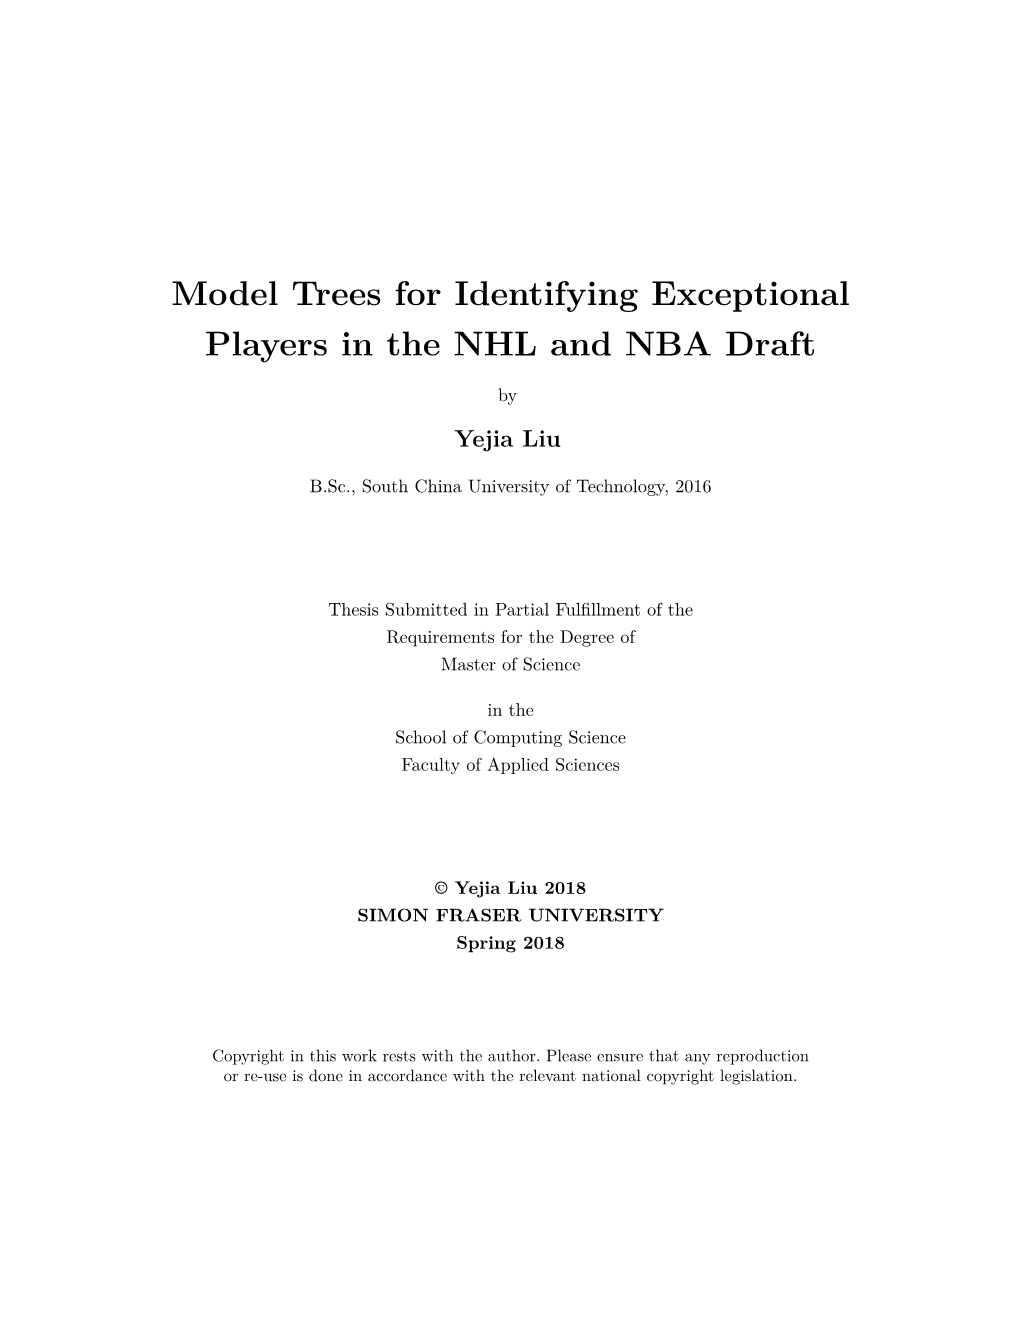 Model Trees for Identifying Exceptional Players in the NHL and NBA Draft